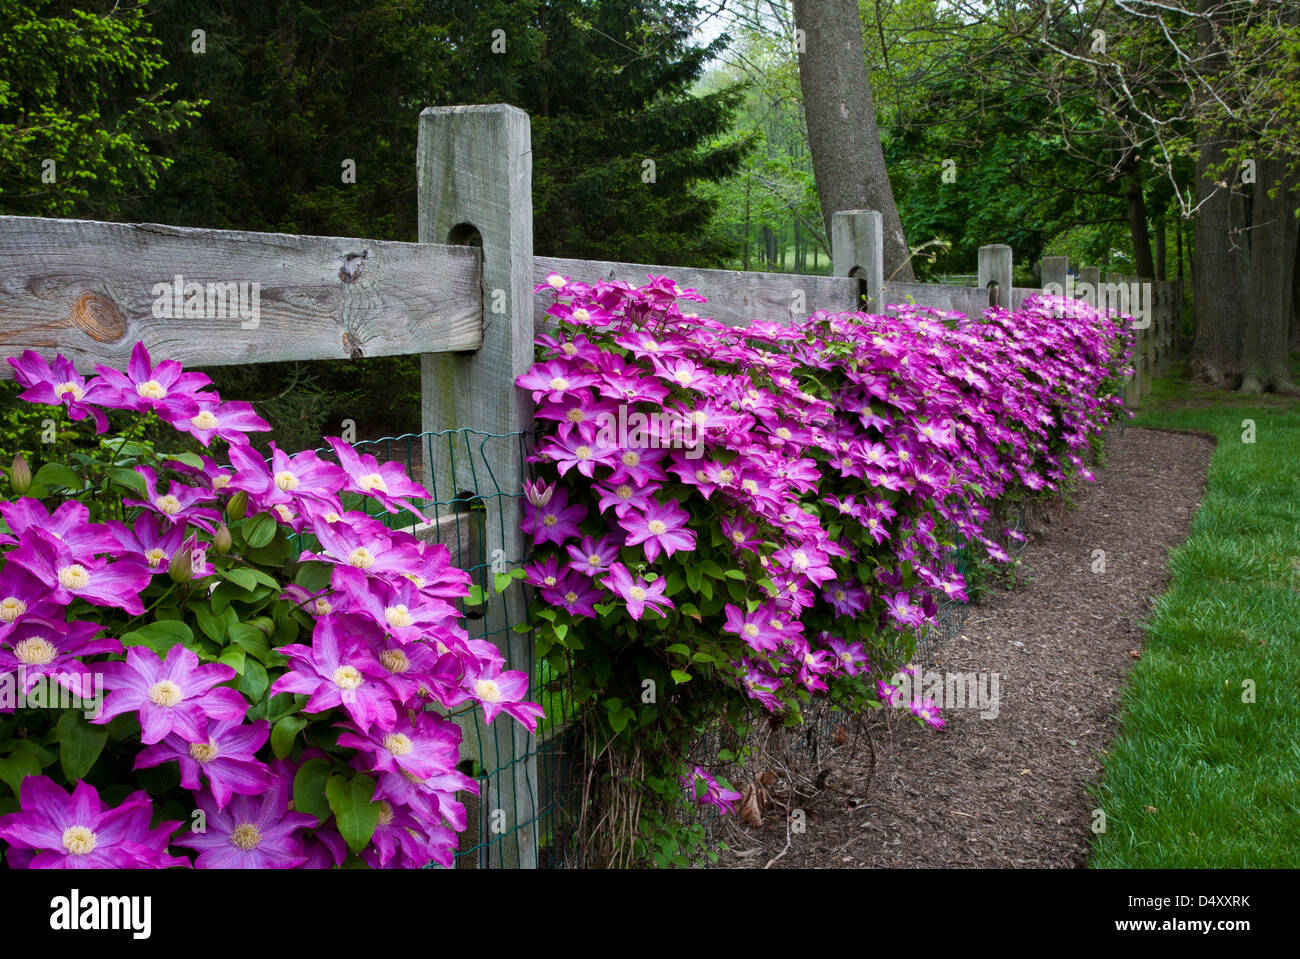 Colorful close up row of pink Clematis vines climing on a wooden garden fence in a backyard border, New Jersey, USA, pastel gardens  Fs 10.18 MB Stock Photo